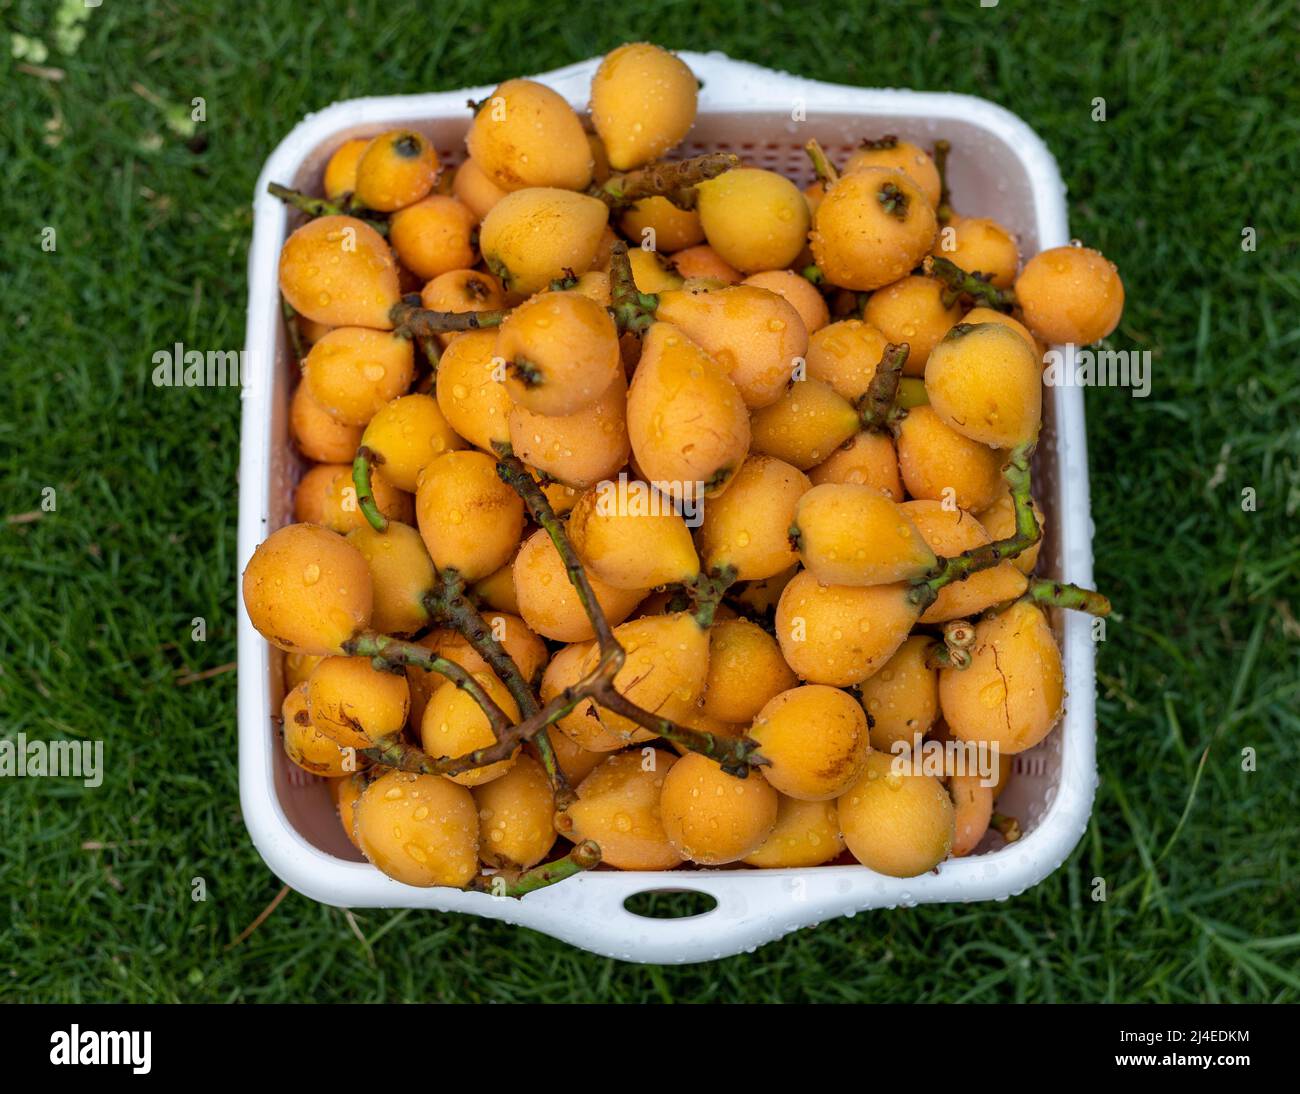 Picking Loquat homegrown fruit from a tree Stock Photo